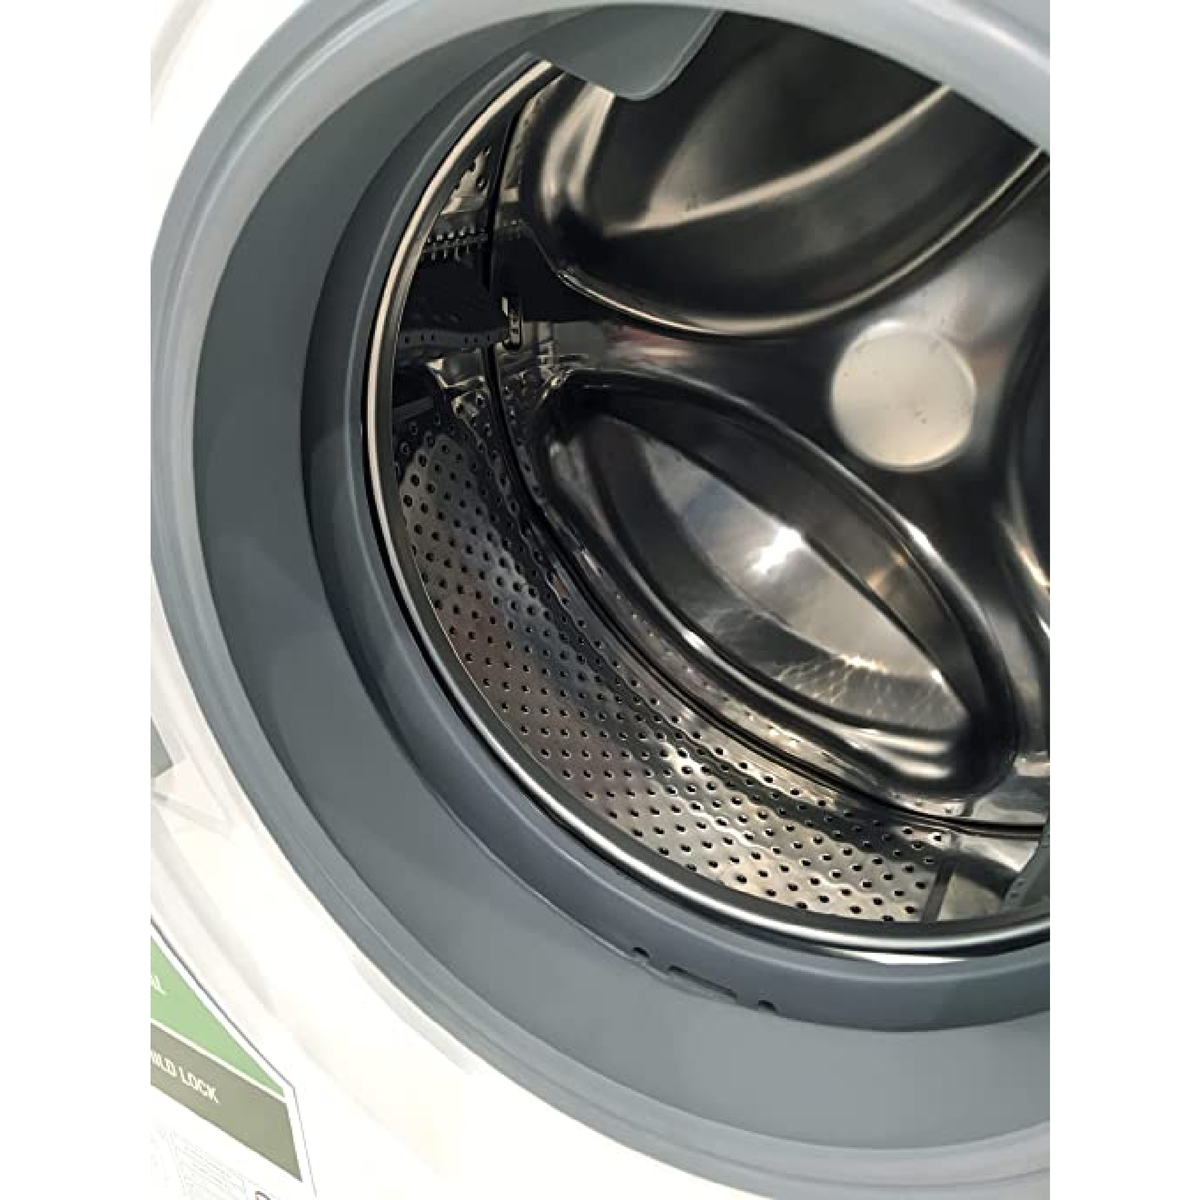 Super General 6 kg Front Load Washing Machine, 1000 RPM, White, SGW6200NLED